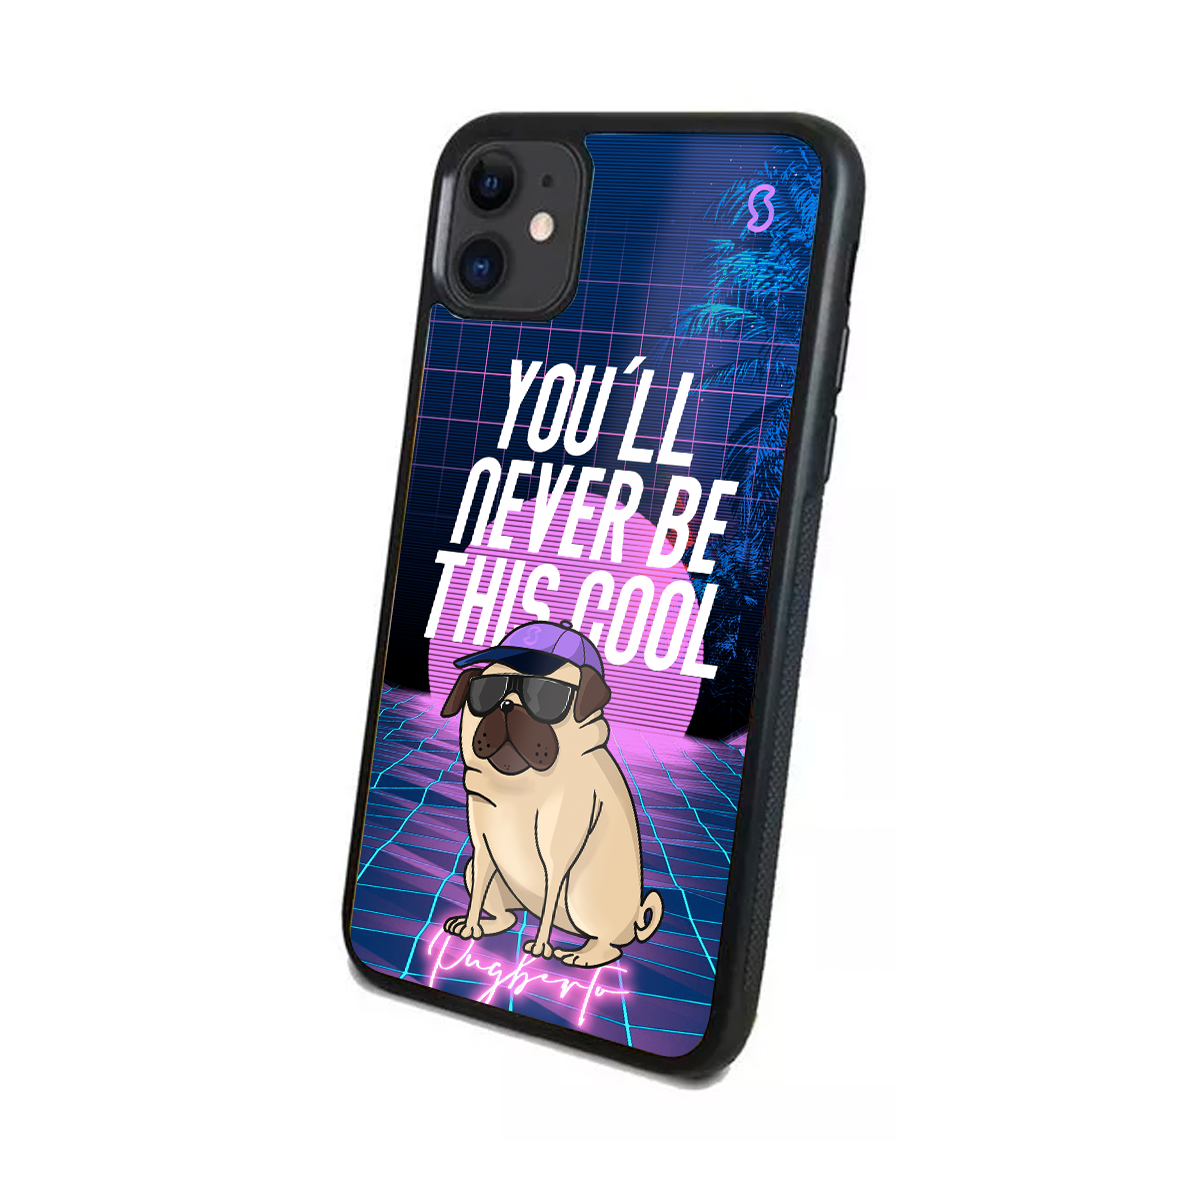 Pugberto sublimated cell phone case so cool